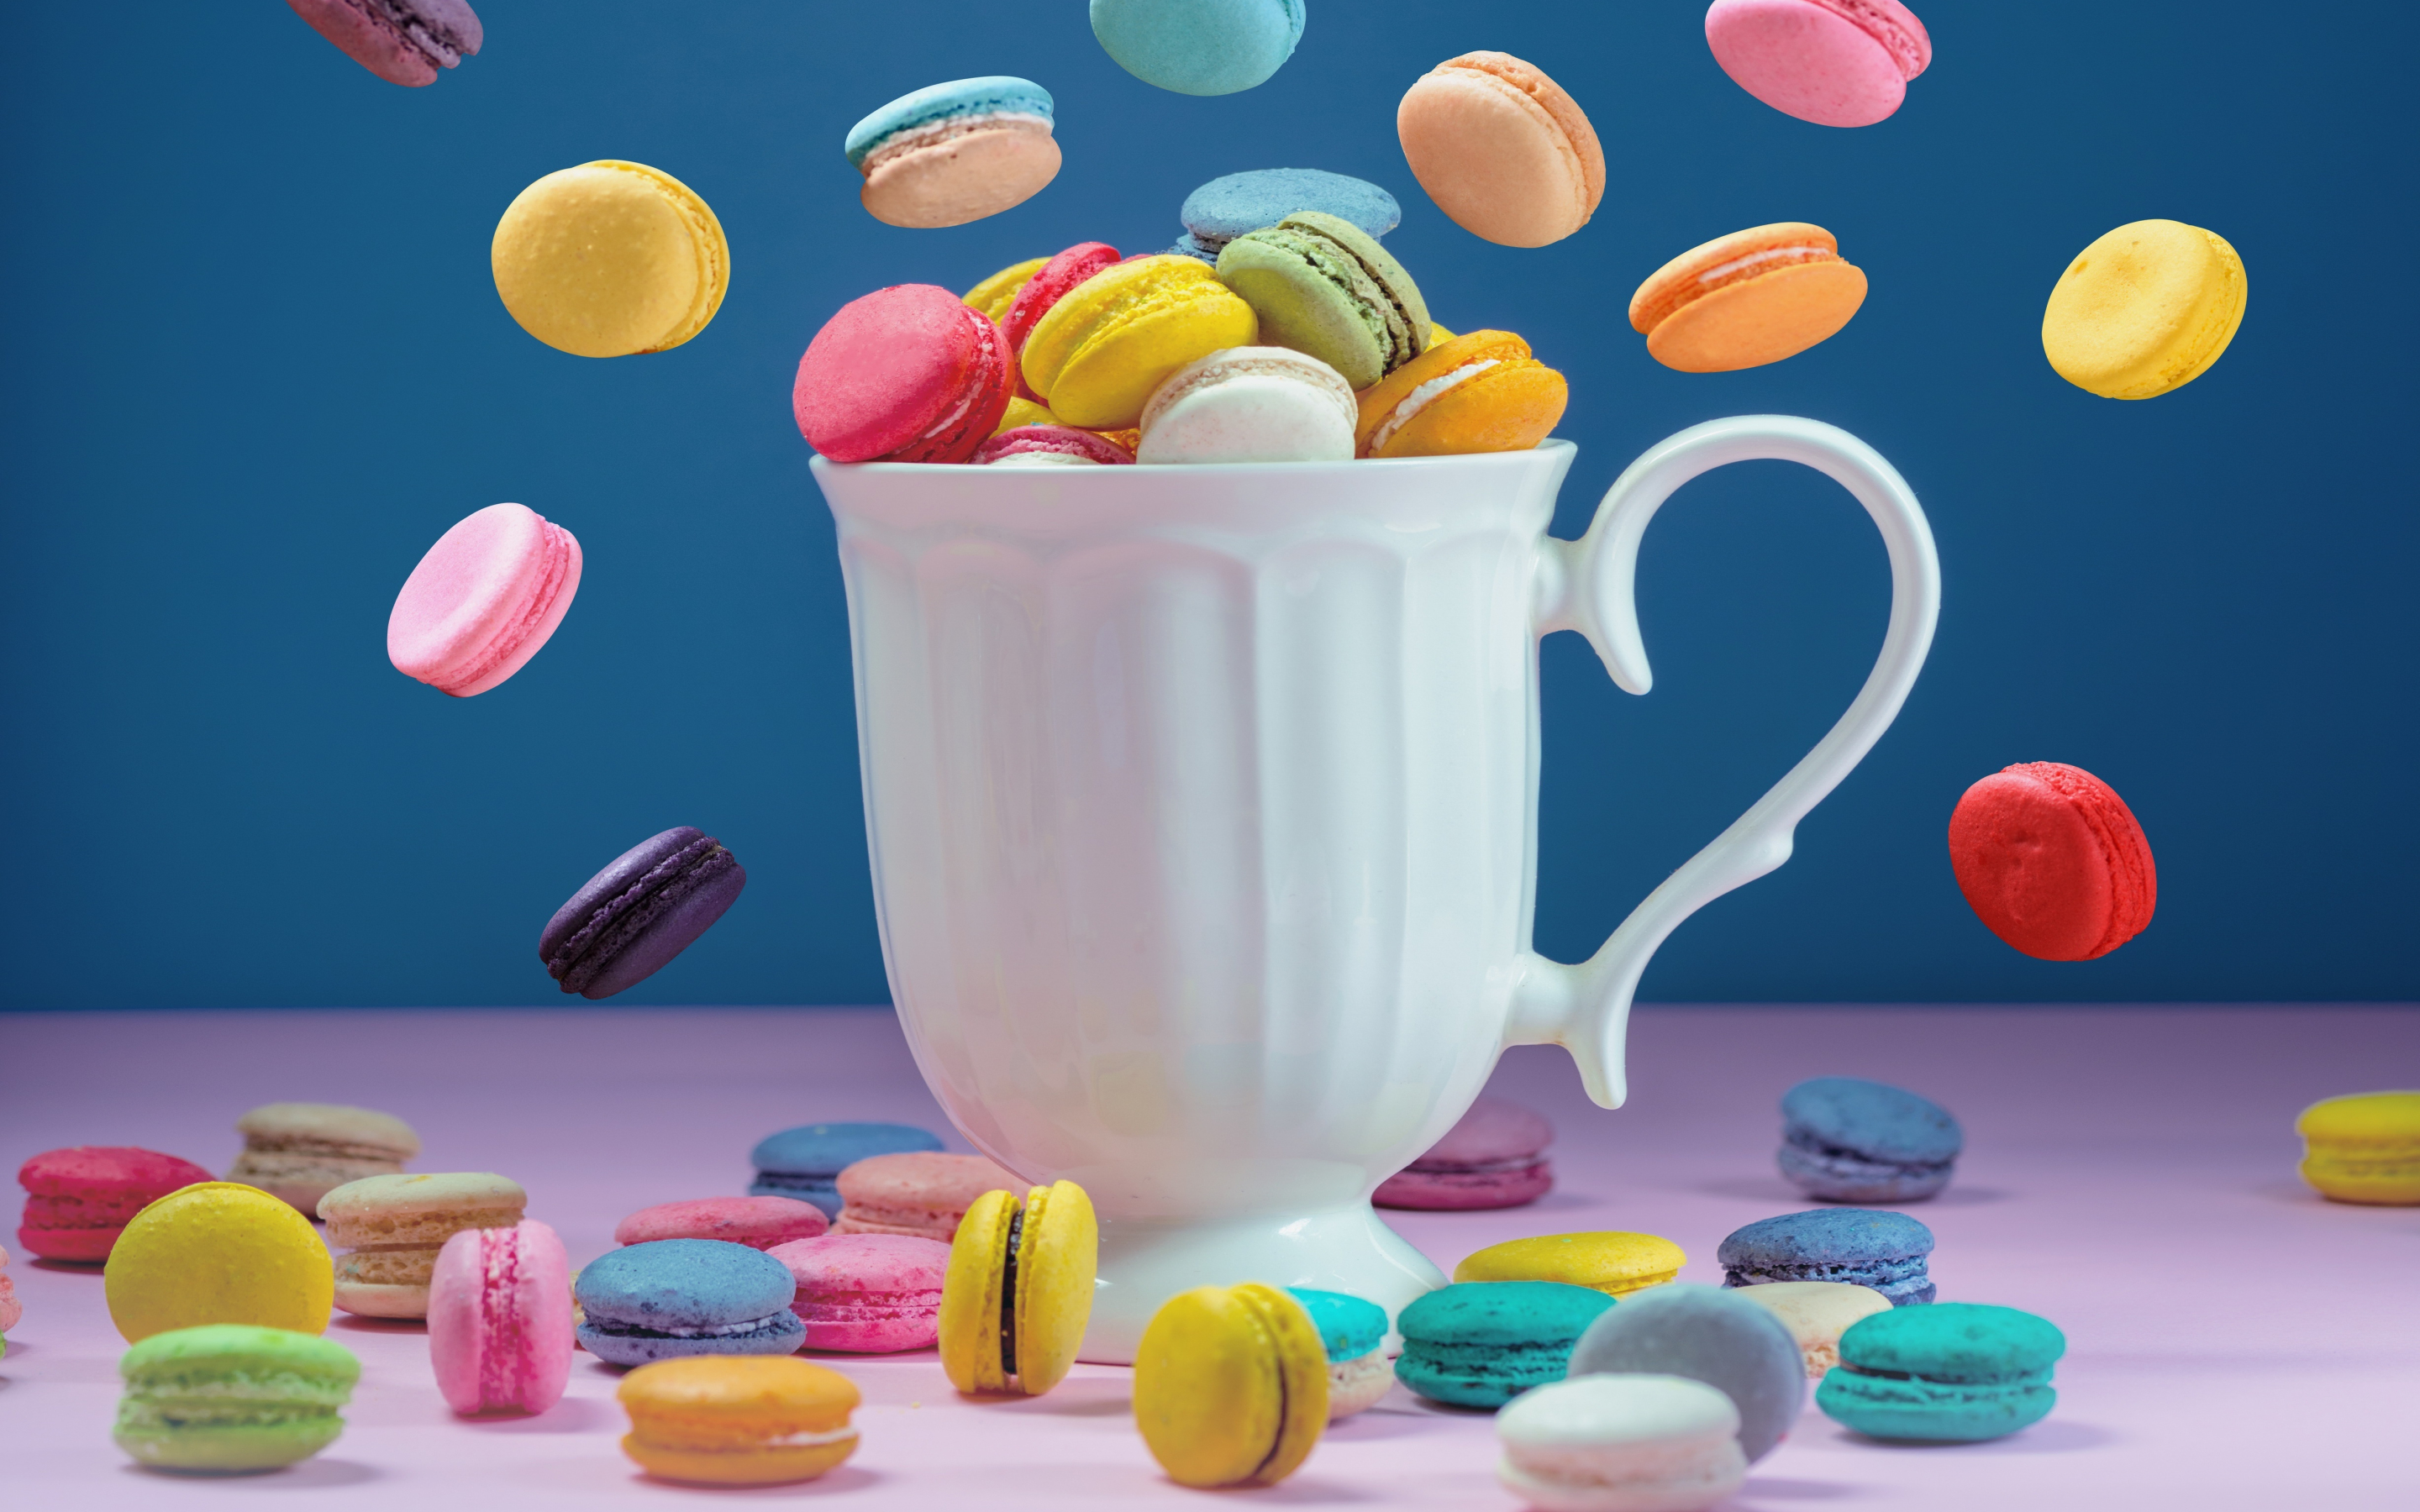 Sweets, colorful, macaron and cup, 2880x1800 wallpaper